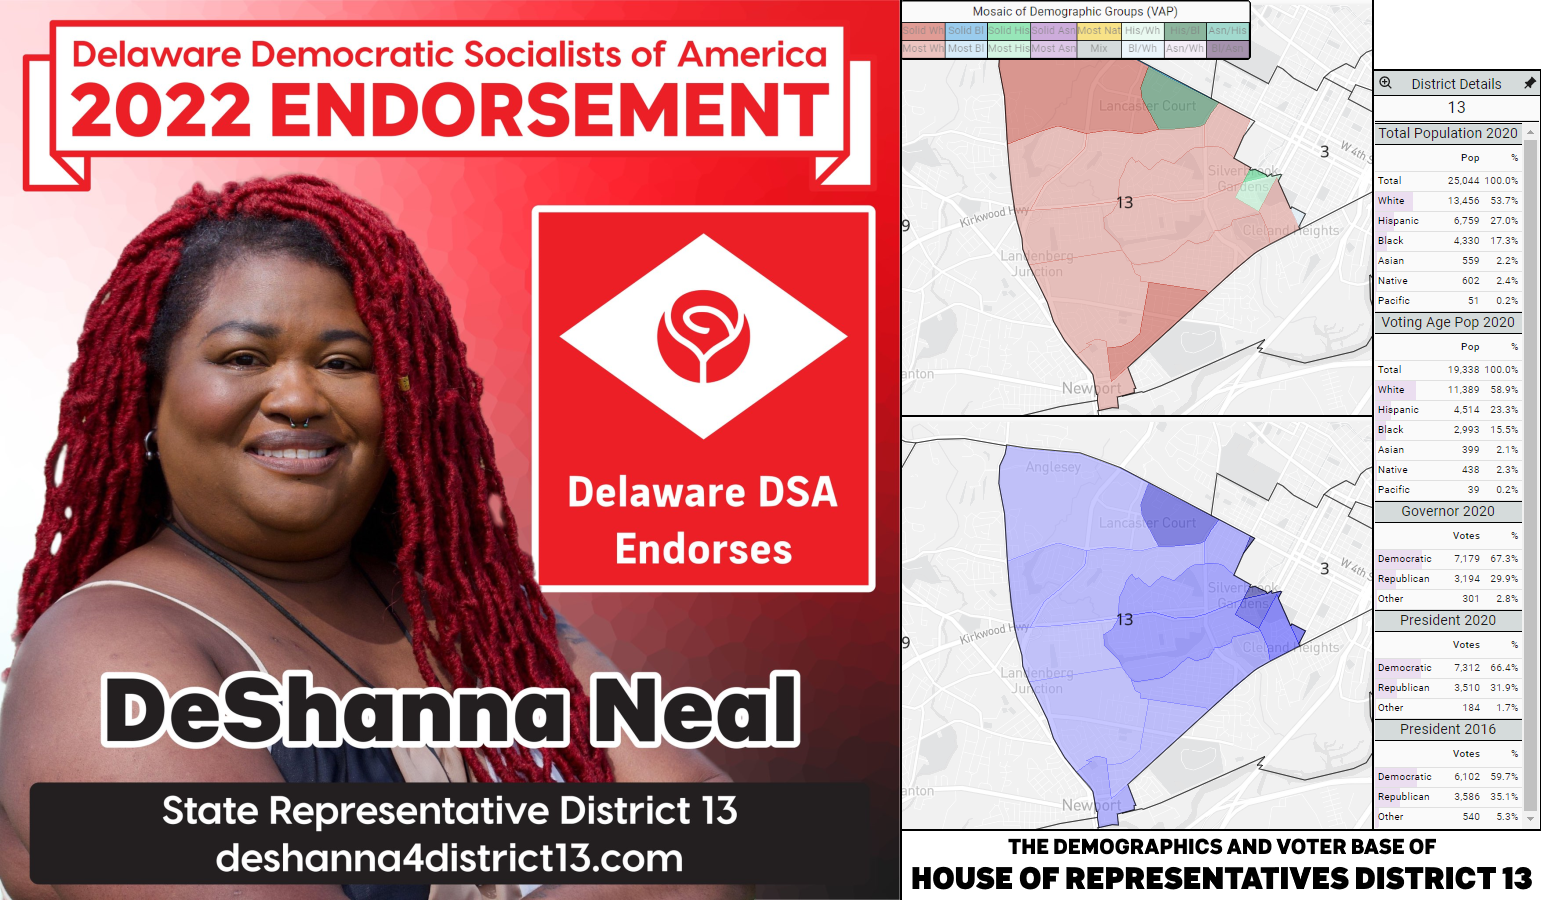 DeShanna Neal's endorsement graphic (she/they; left) and a graphic of the demographics and voting base of House District 13 (right).